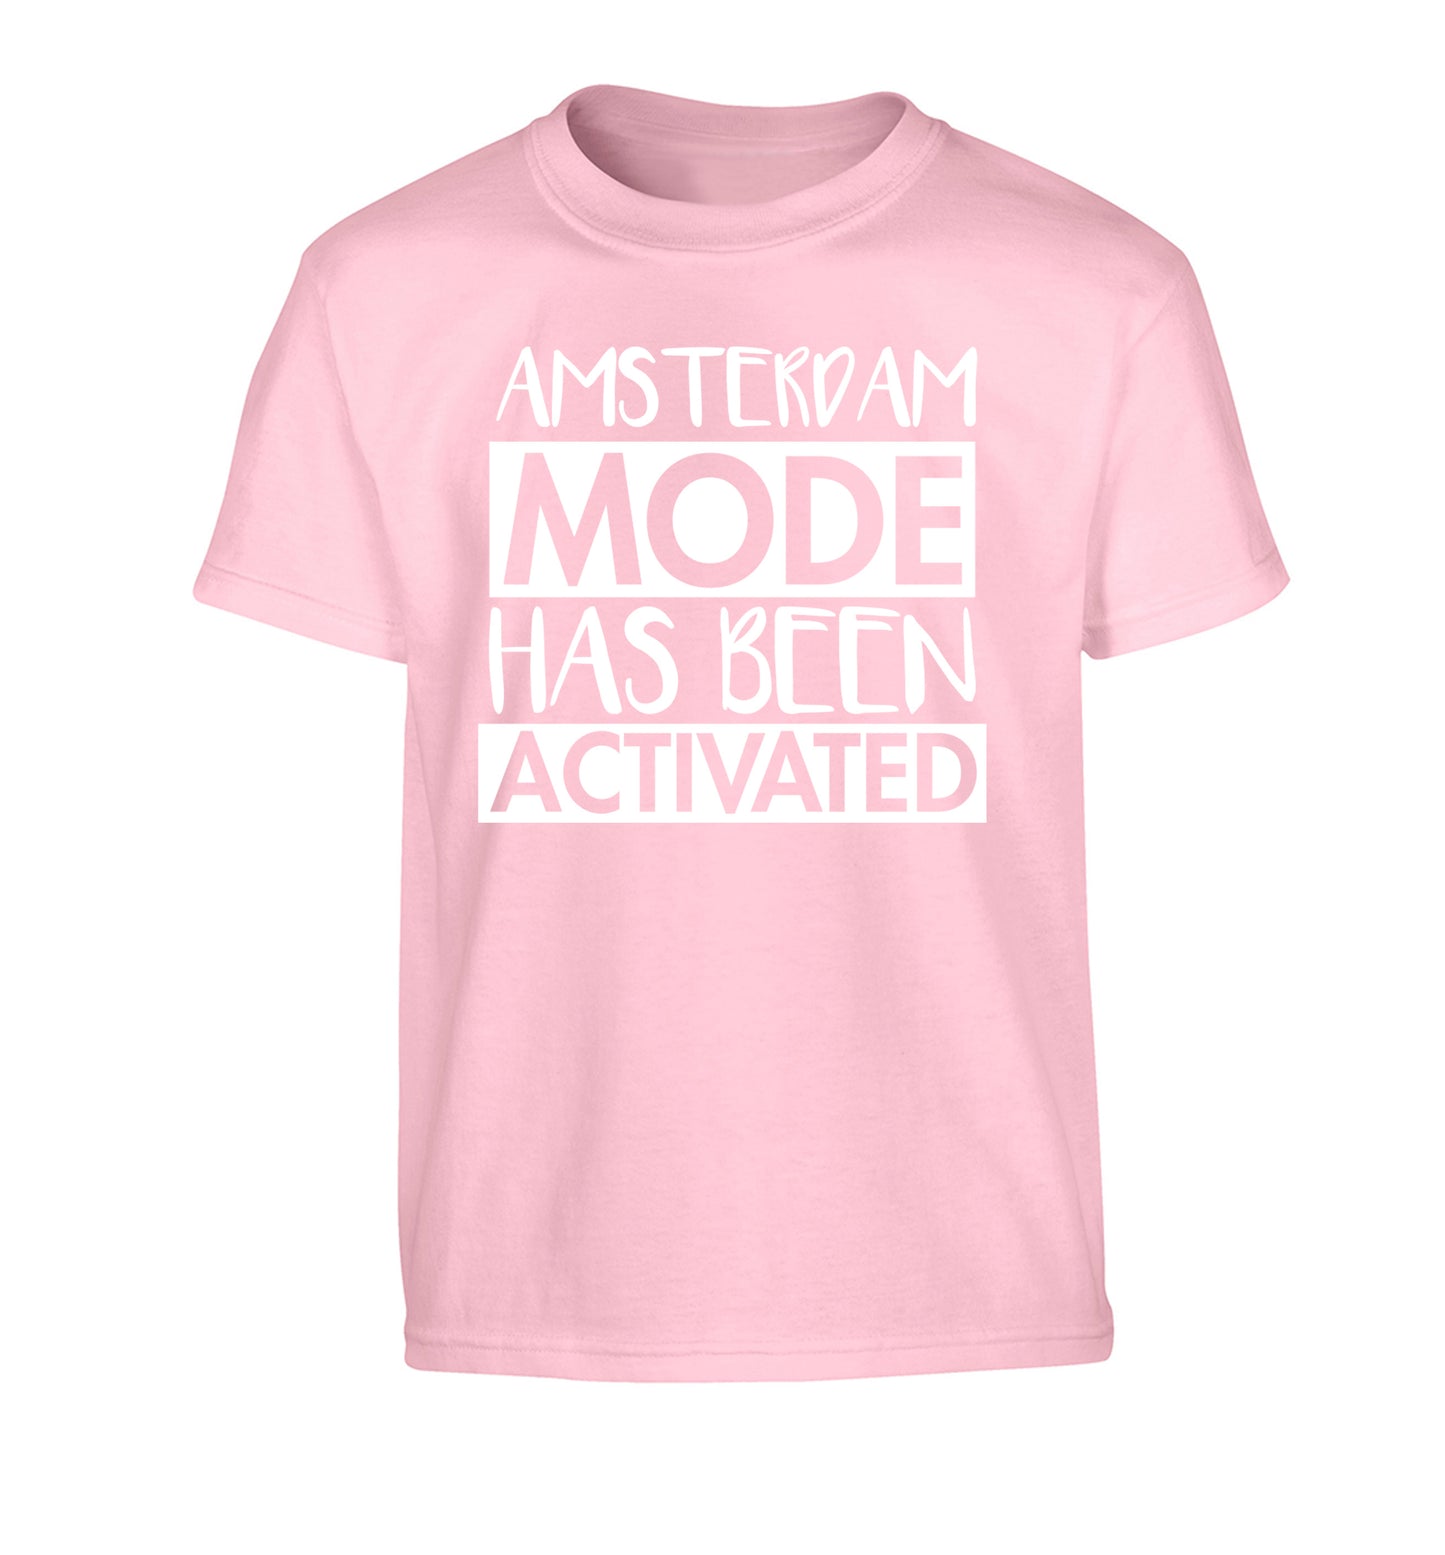 Amsterdam mode has been activated Children's light pink Tshirt 12-13 Years